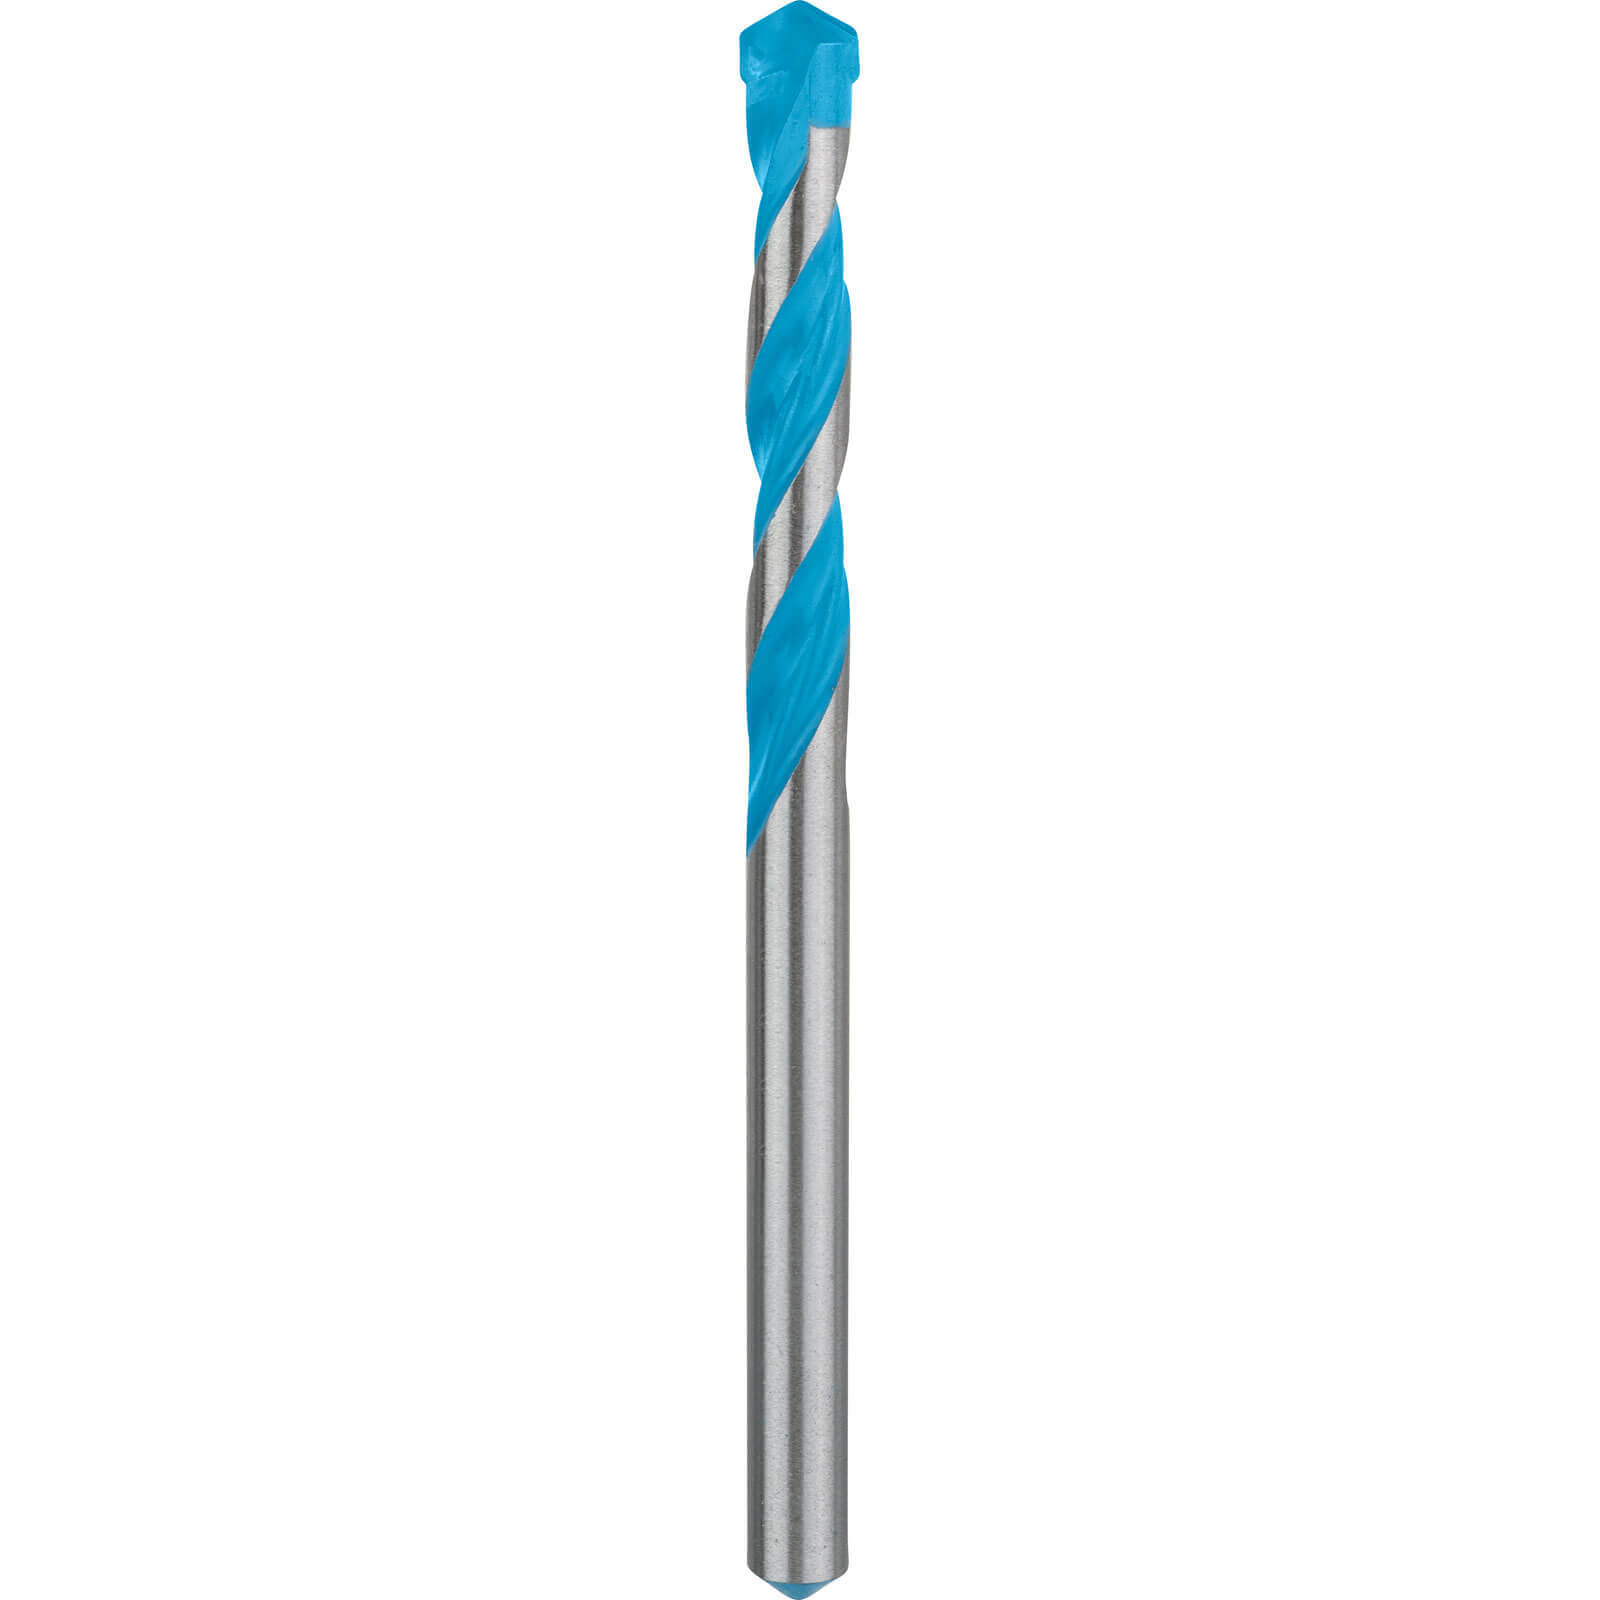 Image of Bosch Expert CYL-9 Multi Construction Drill Bit 11mm 150mm Pack of 1